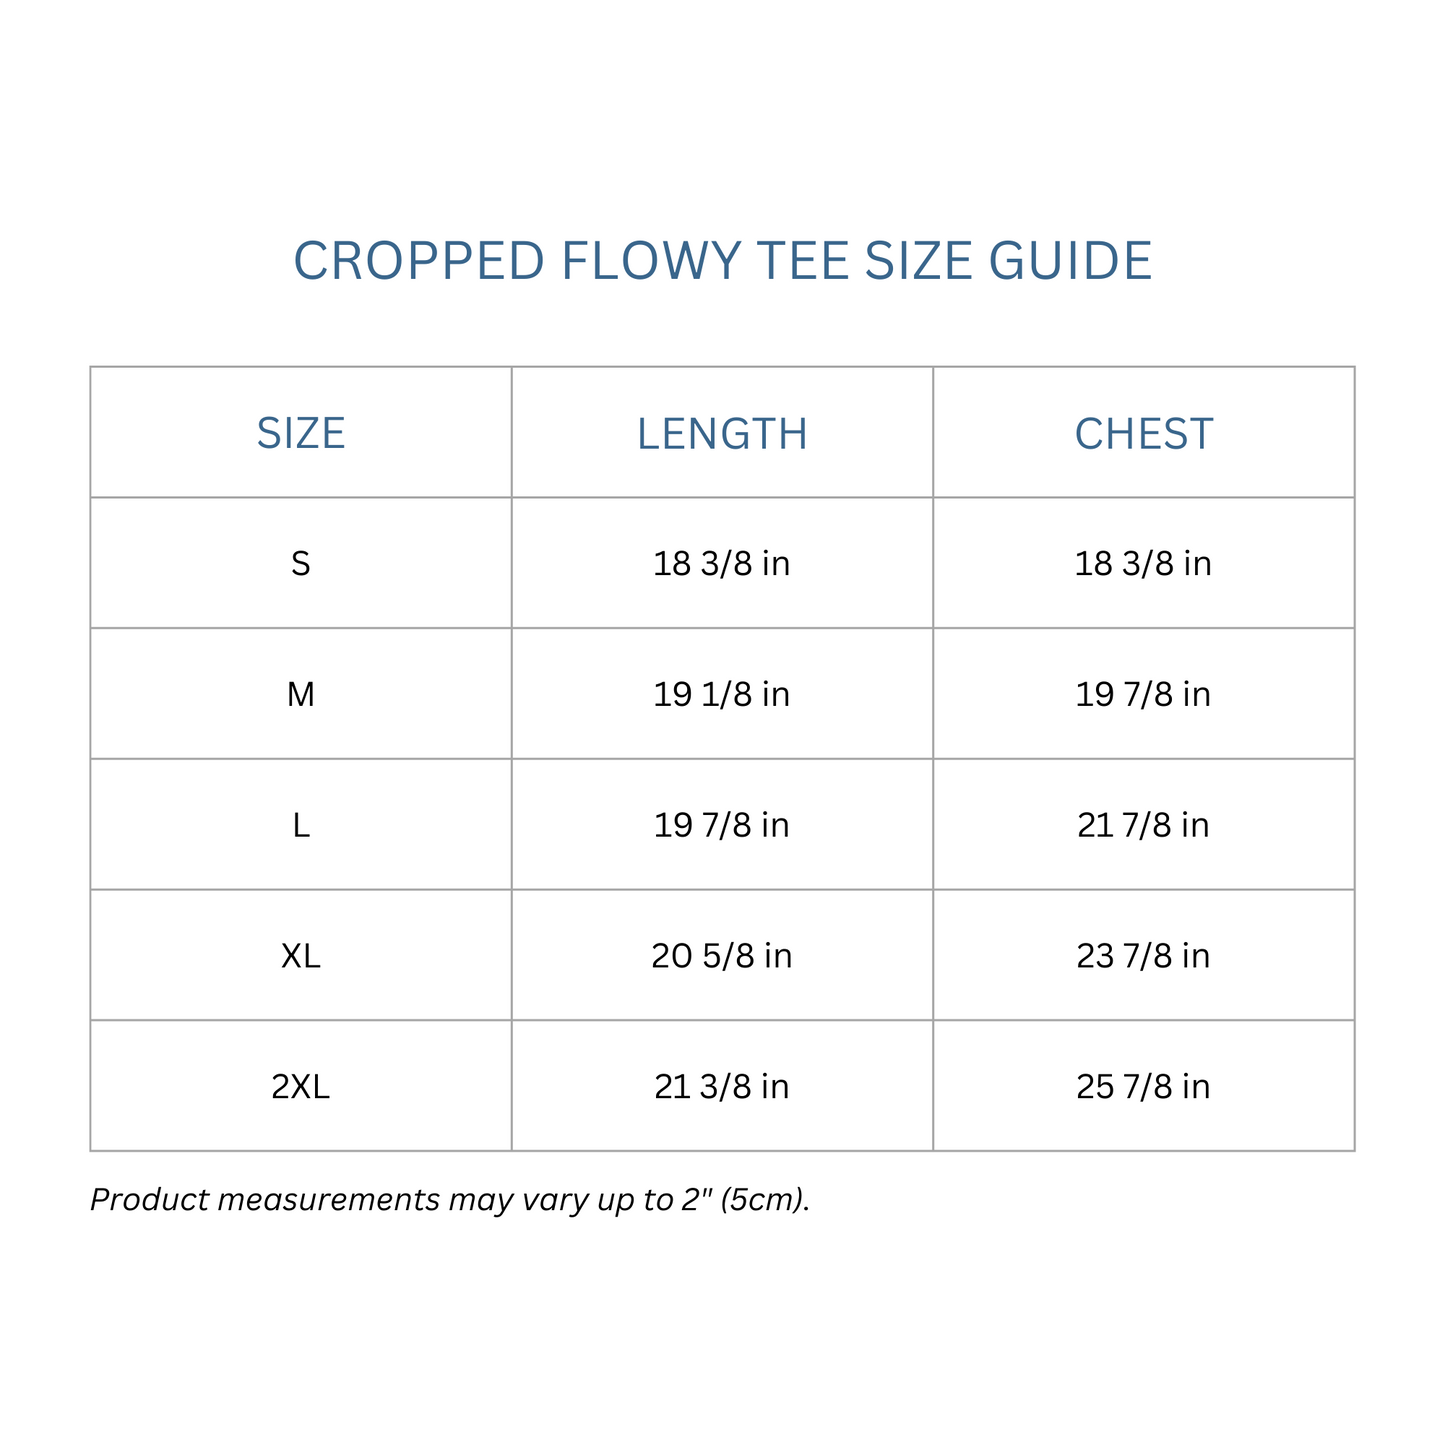 Totes Manila Co size guide for flowy crop tops